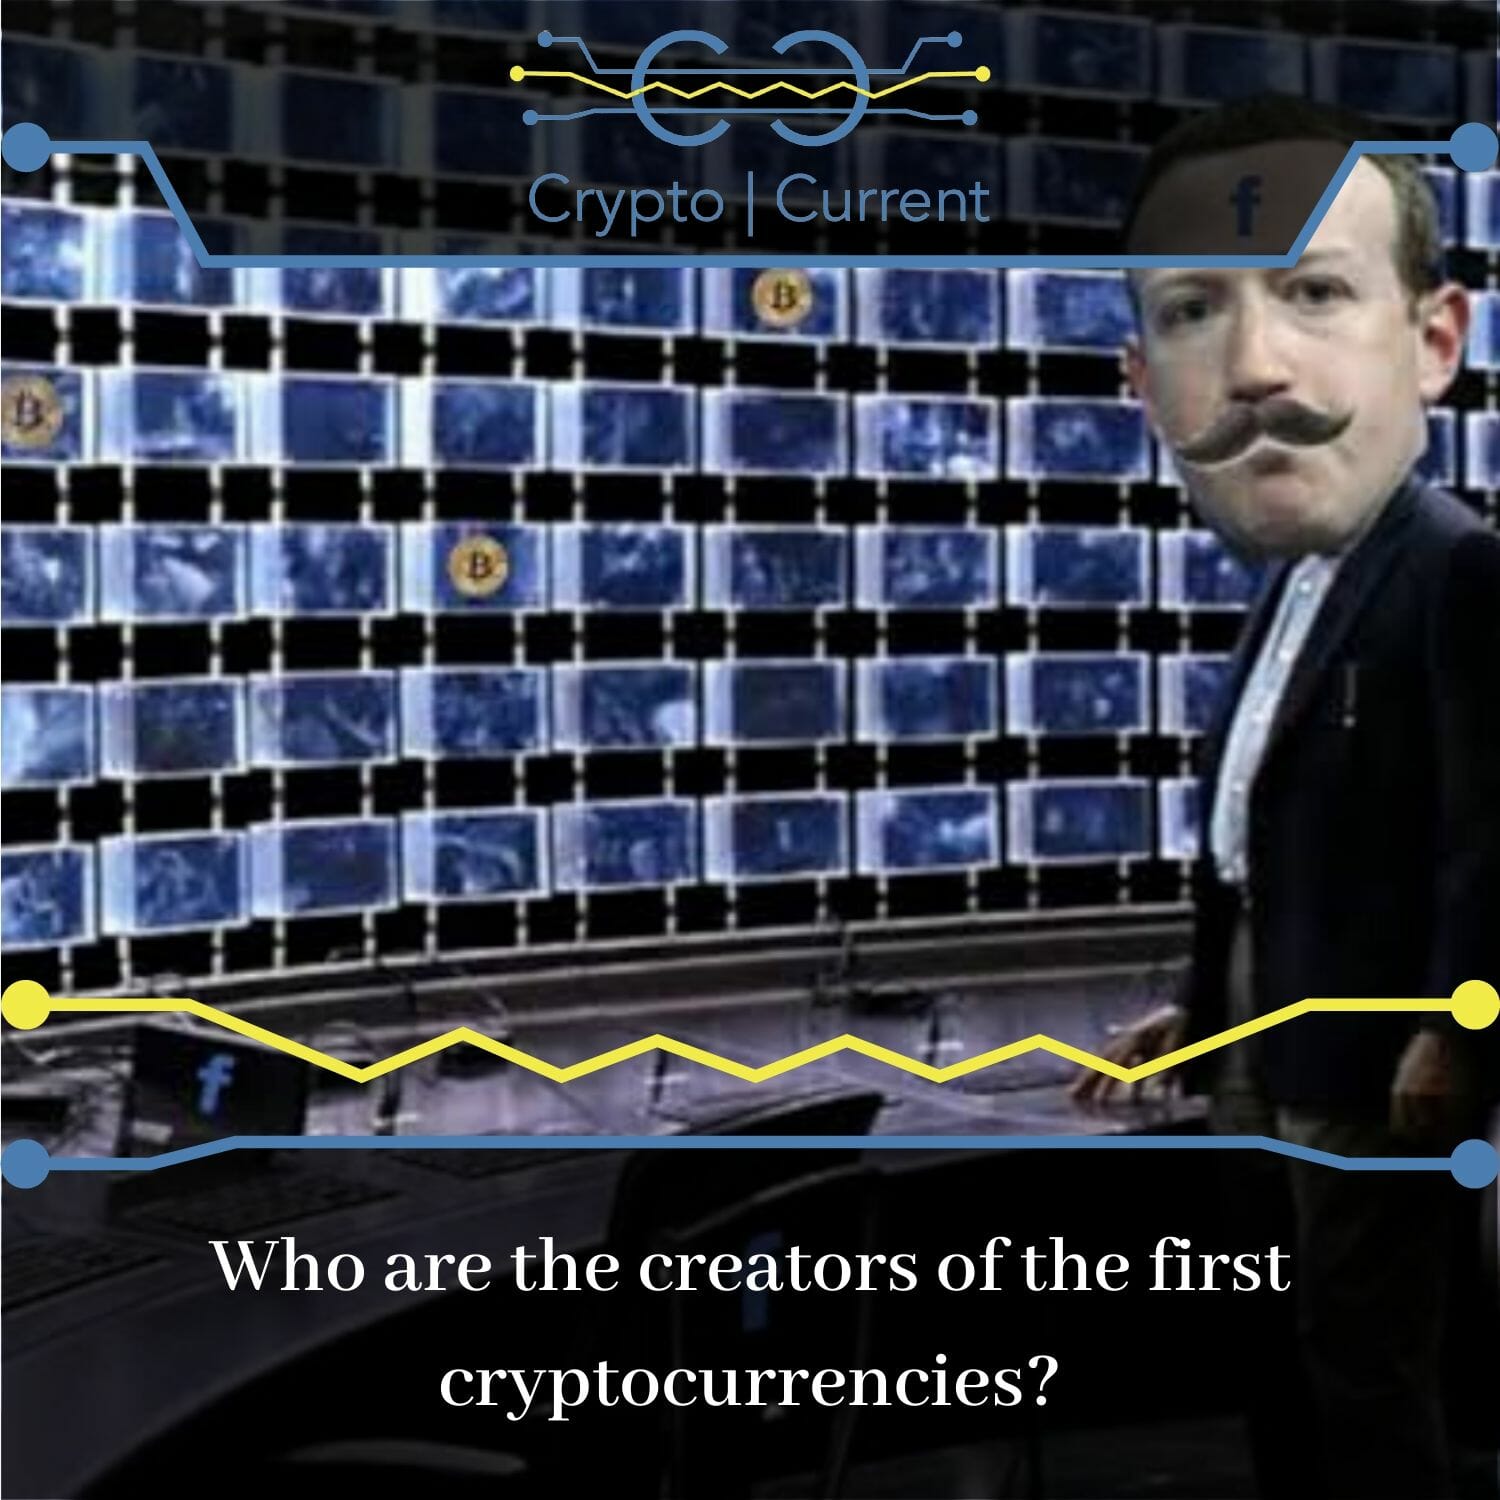 who invented crypto mining